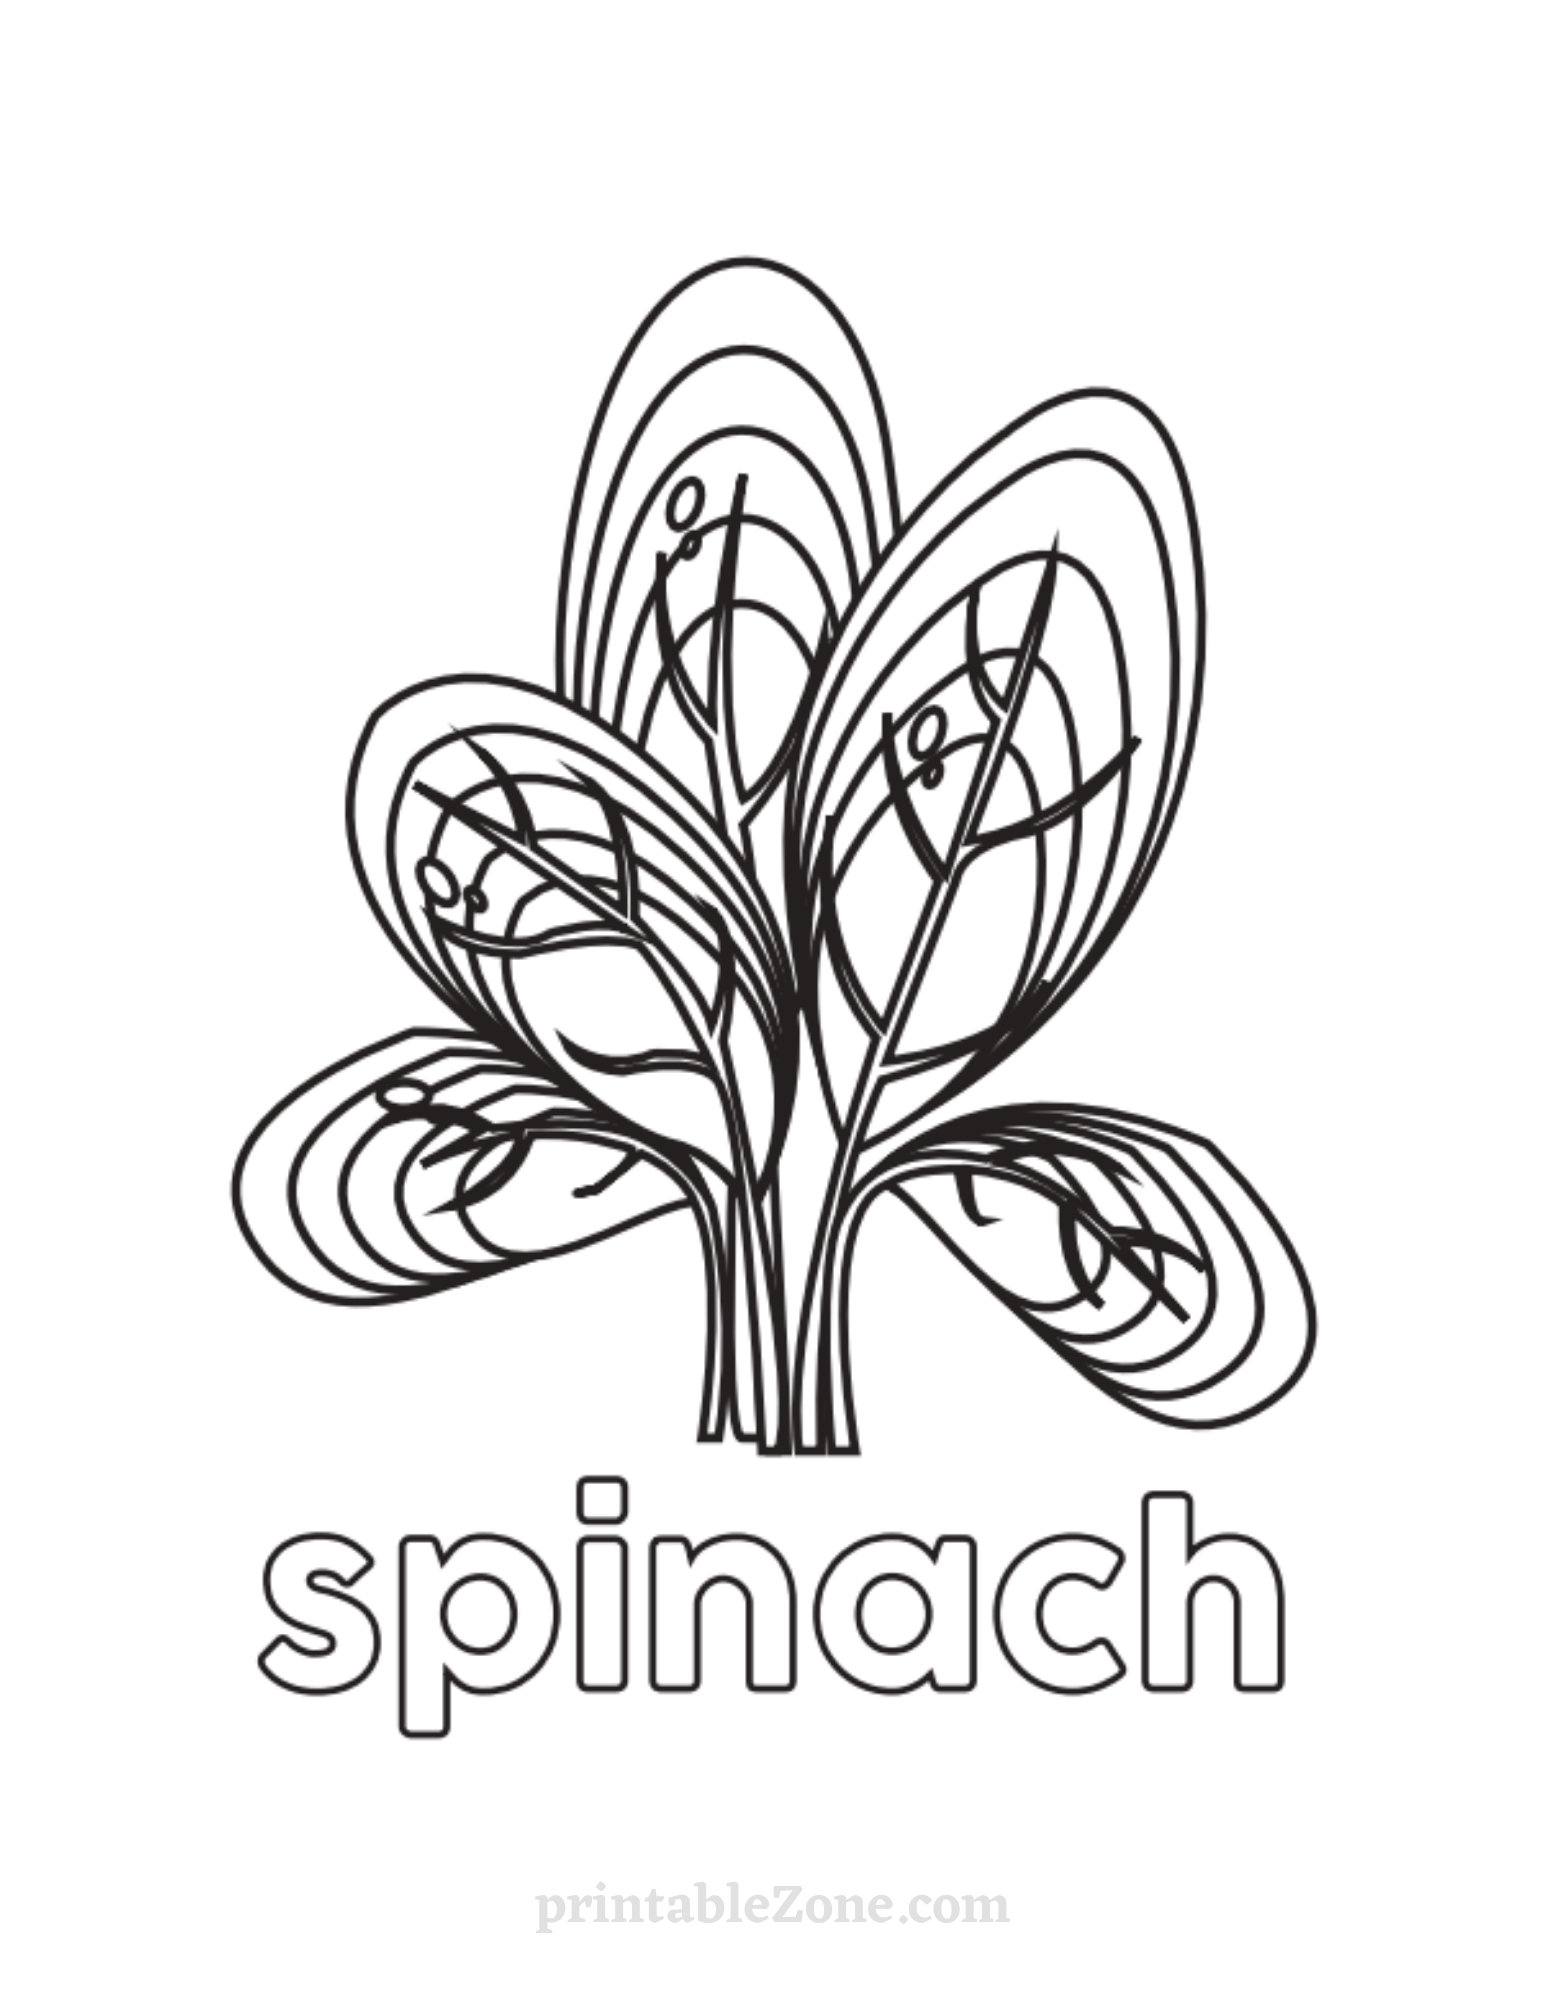 Spinach - Vegetable Coloring Page for Kids - Printable Zone